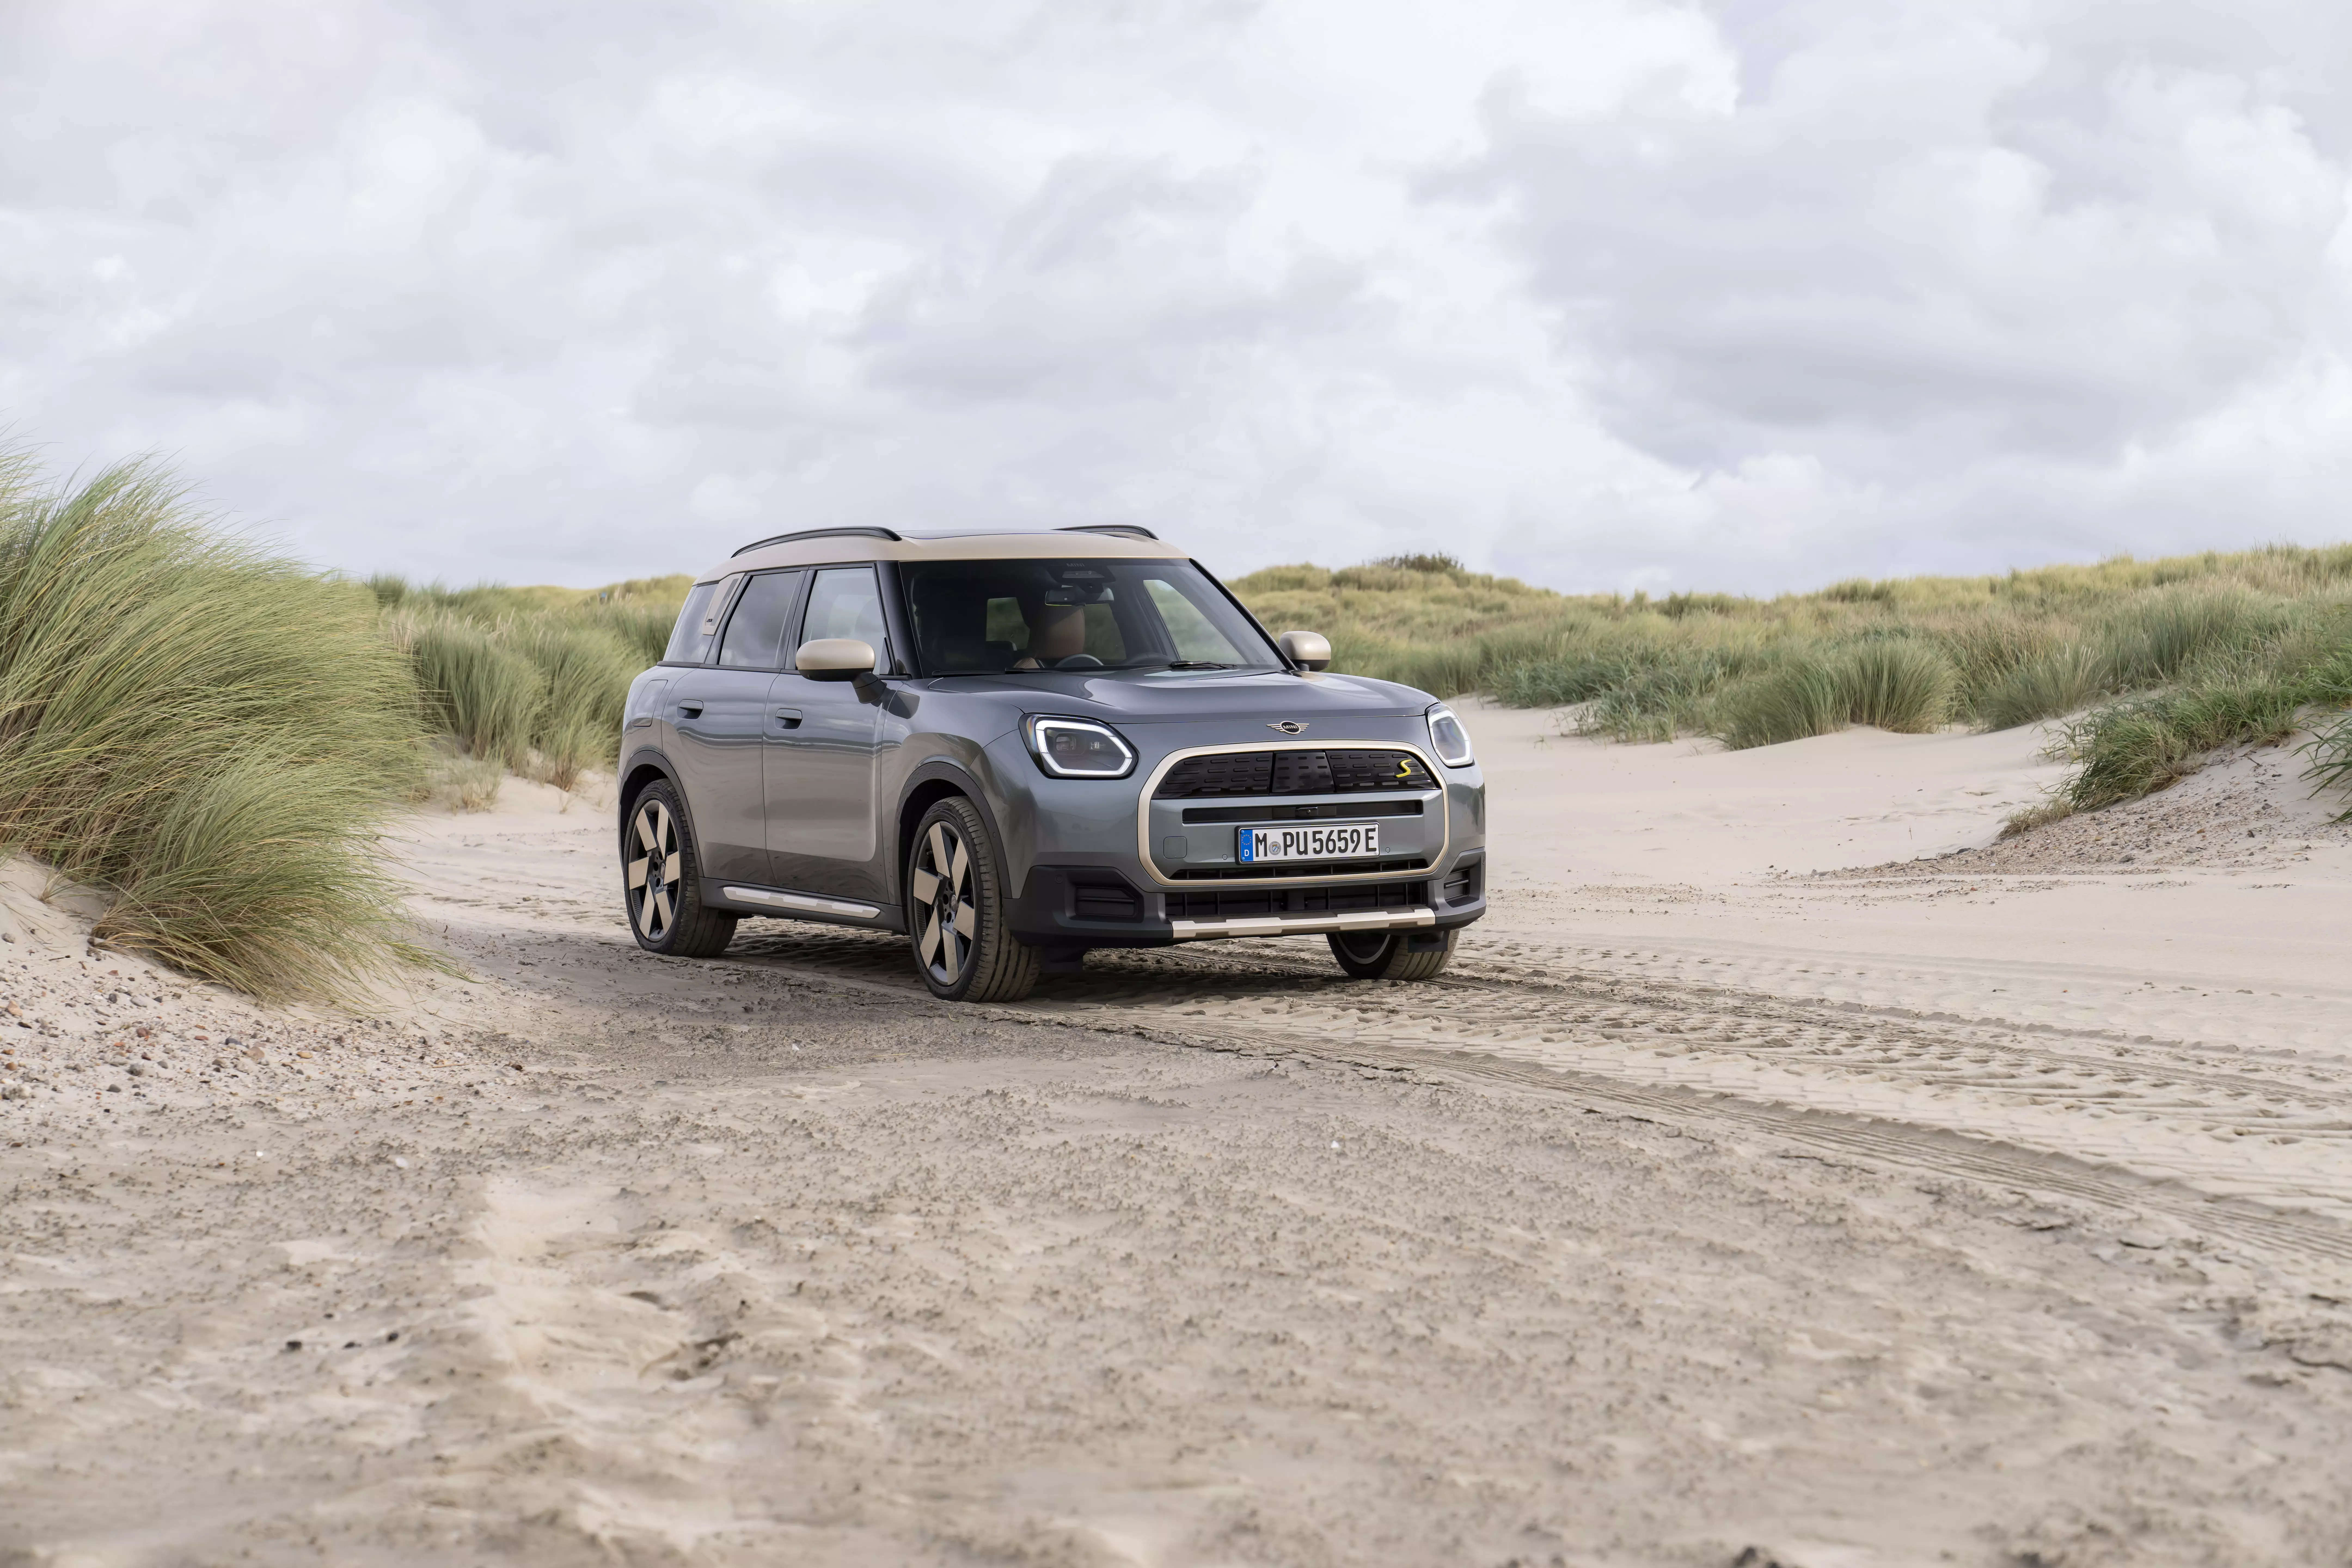 MINI Countryman SE ALL4 gets tech-savvy and luxurious interior, ET